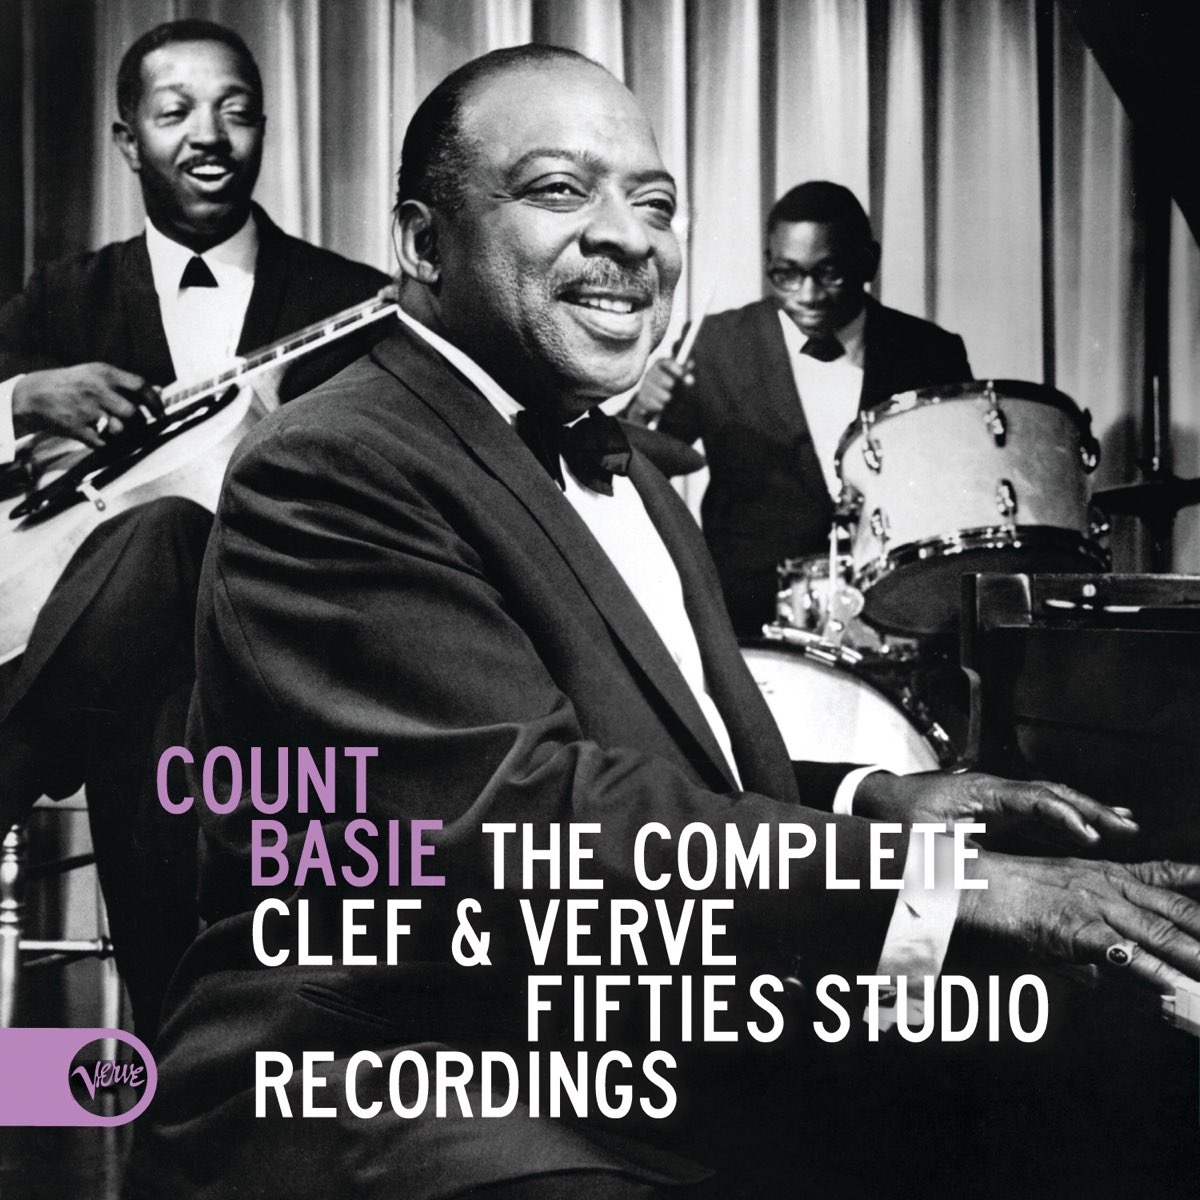 The Complete Clef & Verve Fifties Studio Recordings by Count Basie on Apple  Music